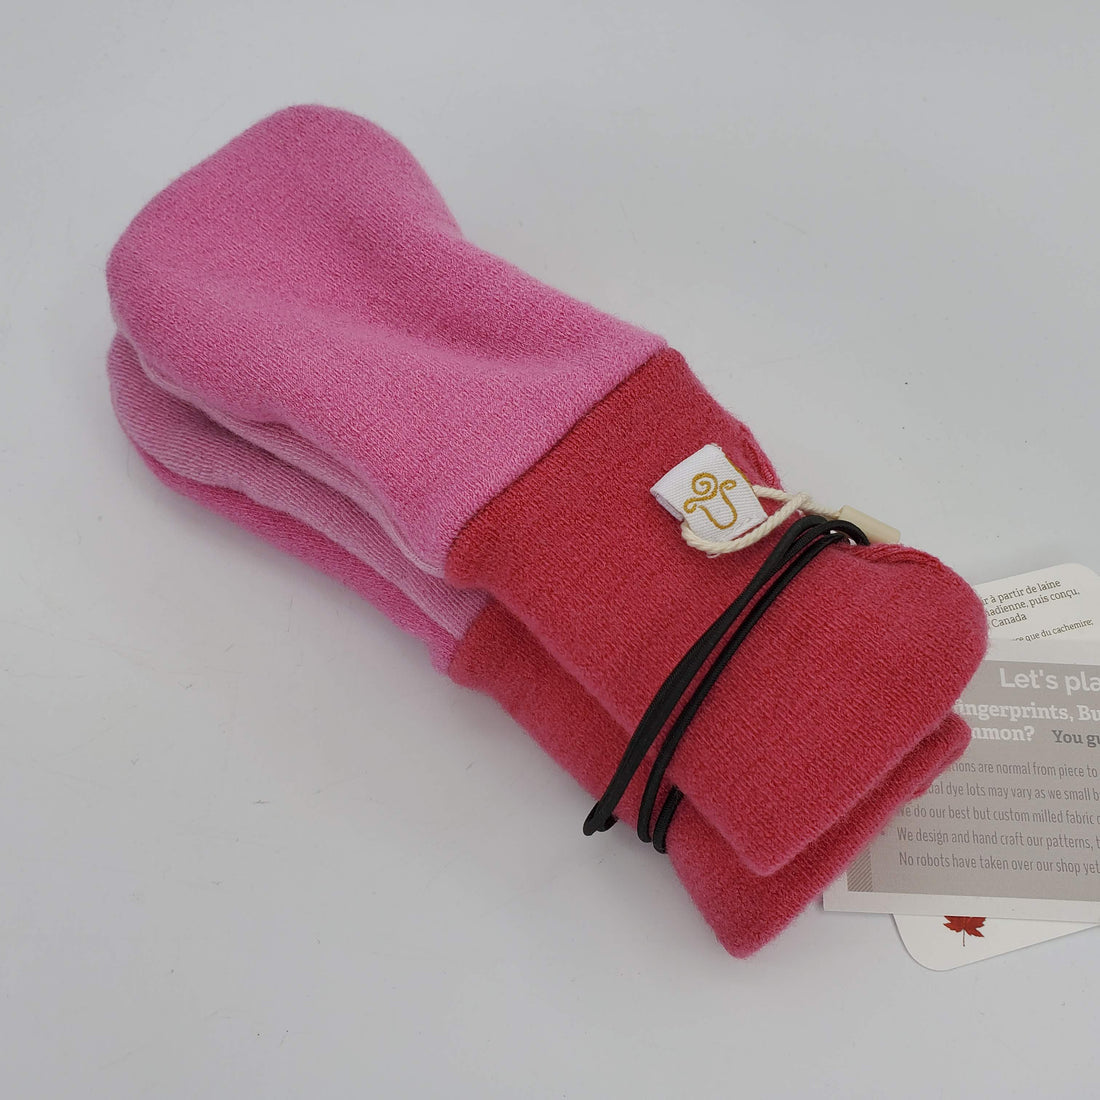 Wool Mitts - Baby Thumbless